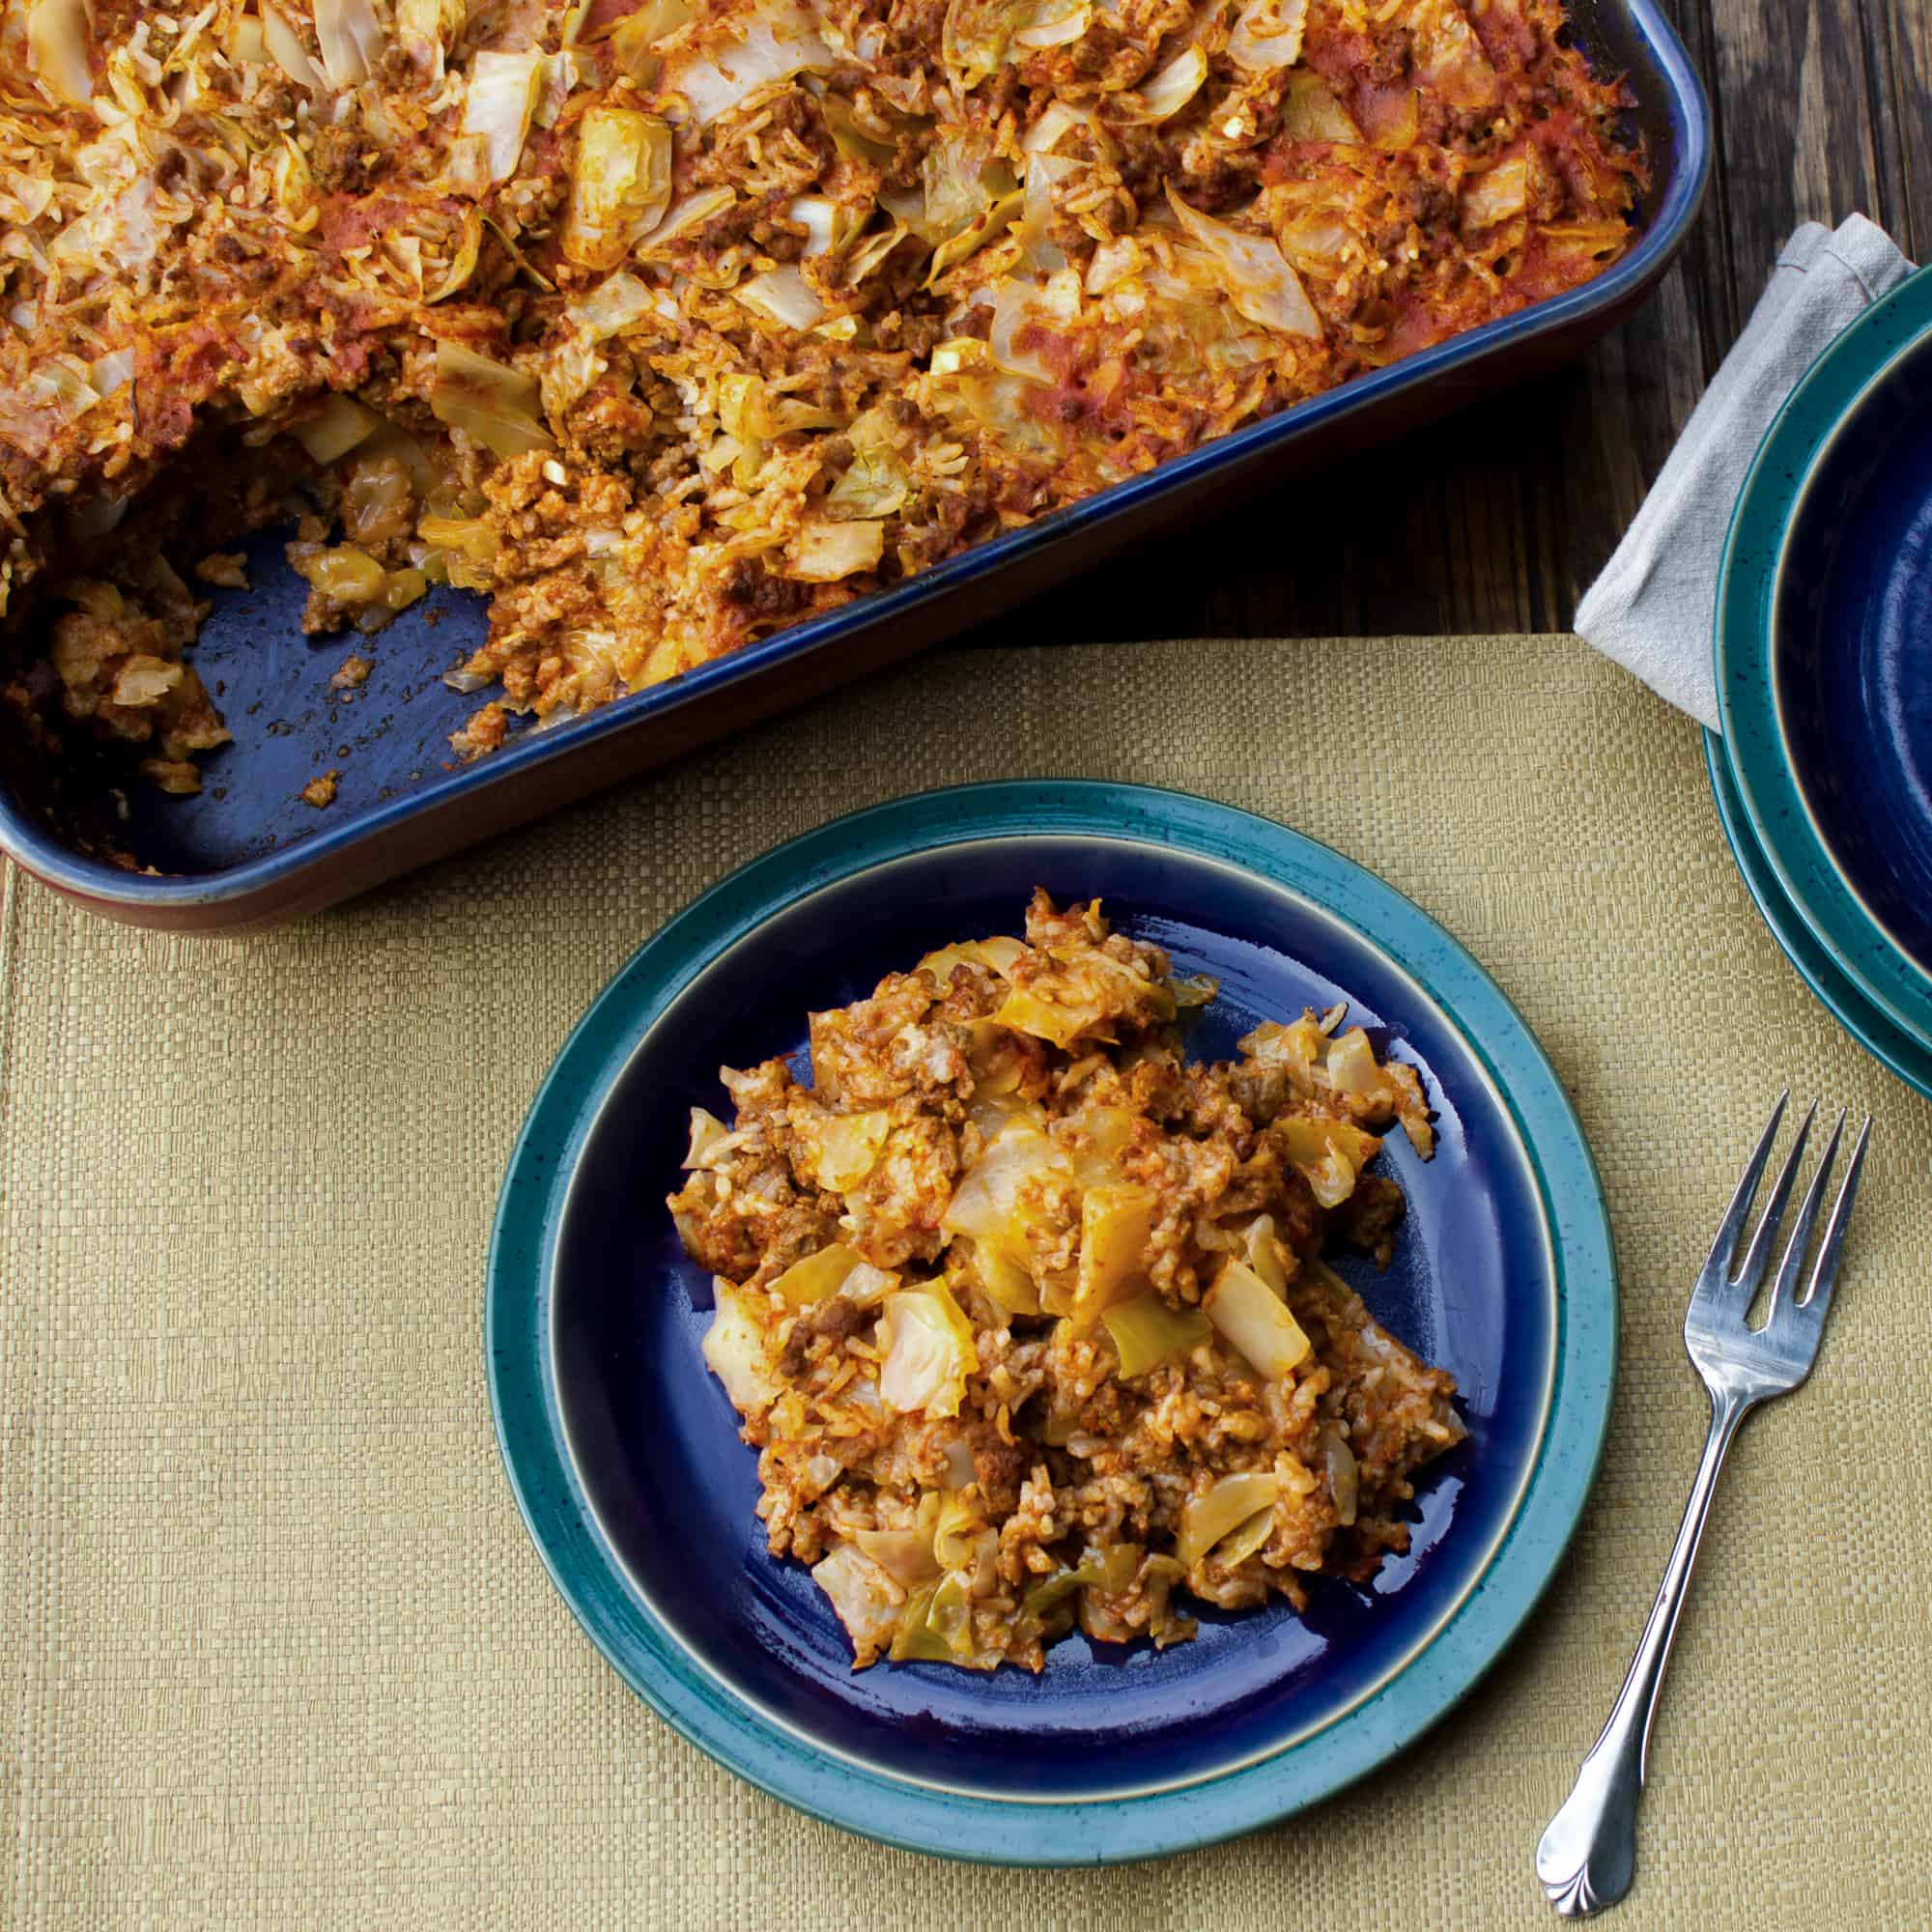 Cabbage Roll Casserole Easy Recipe For This One Pot Meal,Cooking Ribs On The Grill Then In Oven